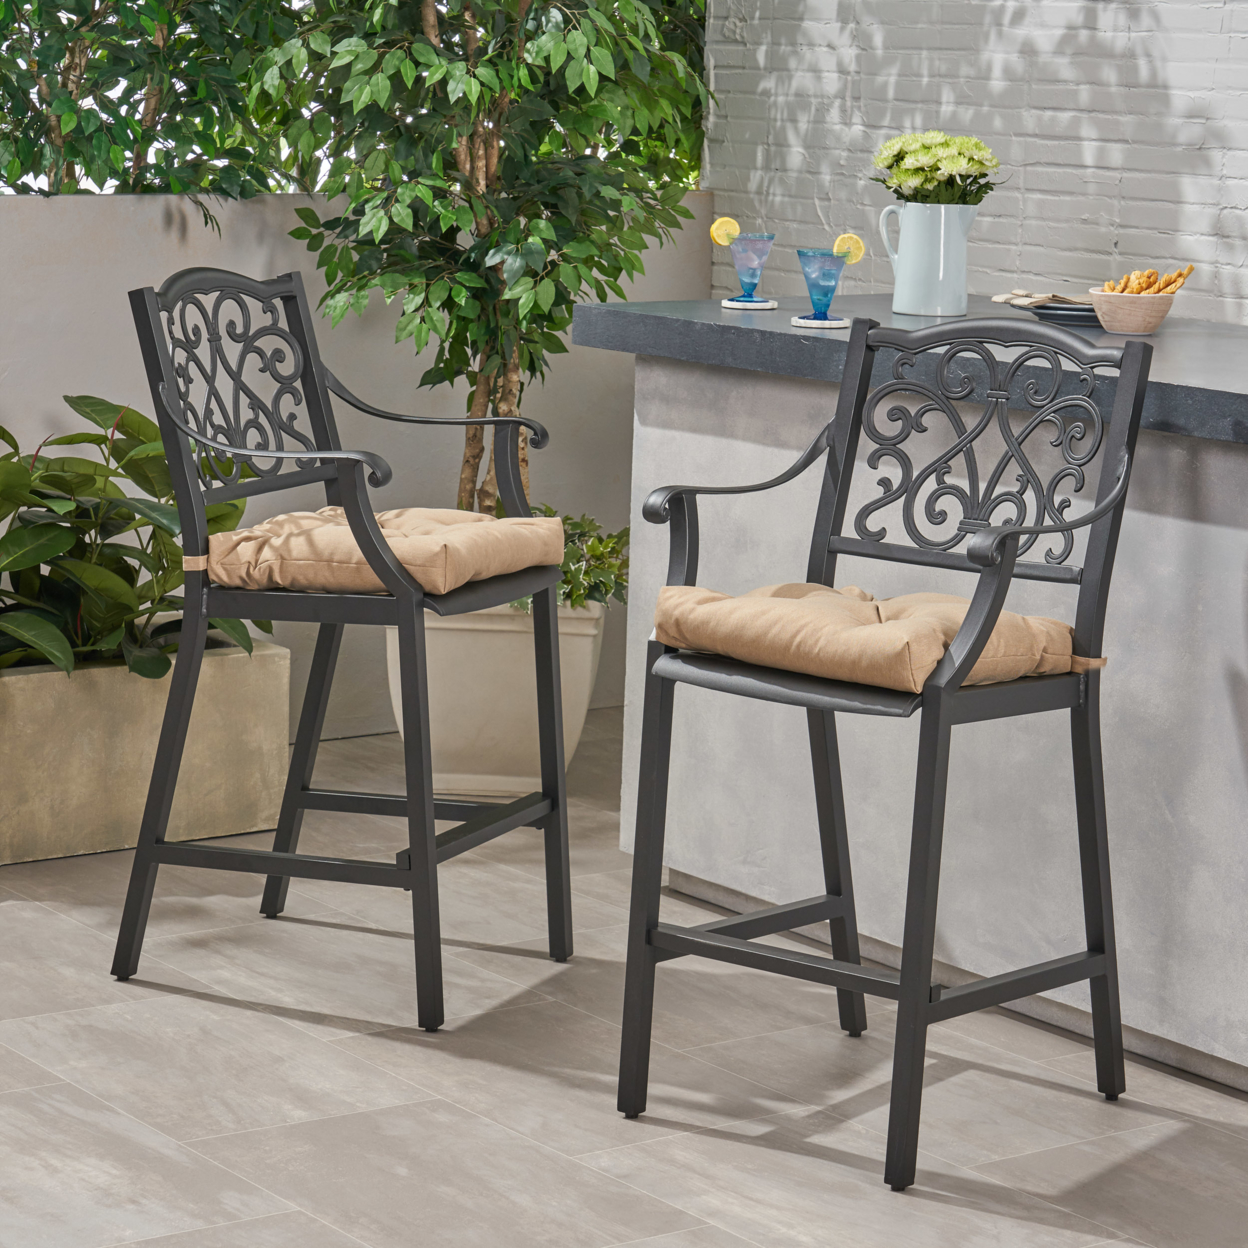 Frances Outdoor Barstool With Cushion (Set Of 2) Antique Matte Black And Charcoal - Antique Matte Black + Tuscany